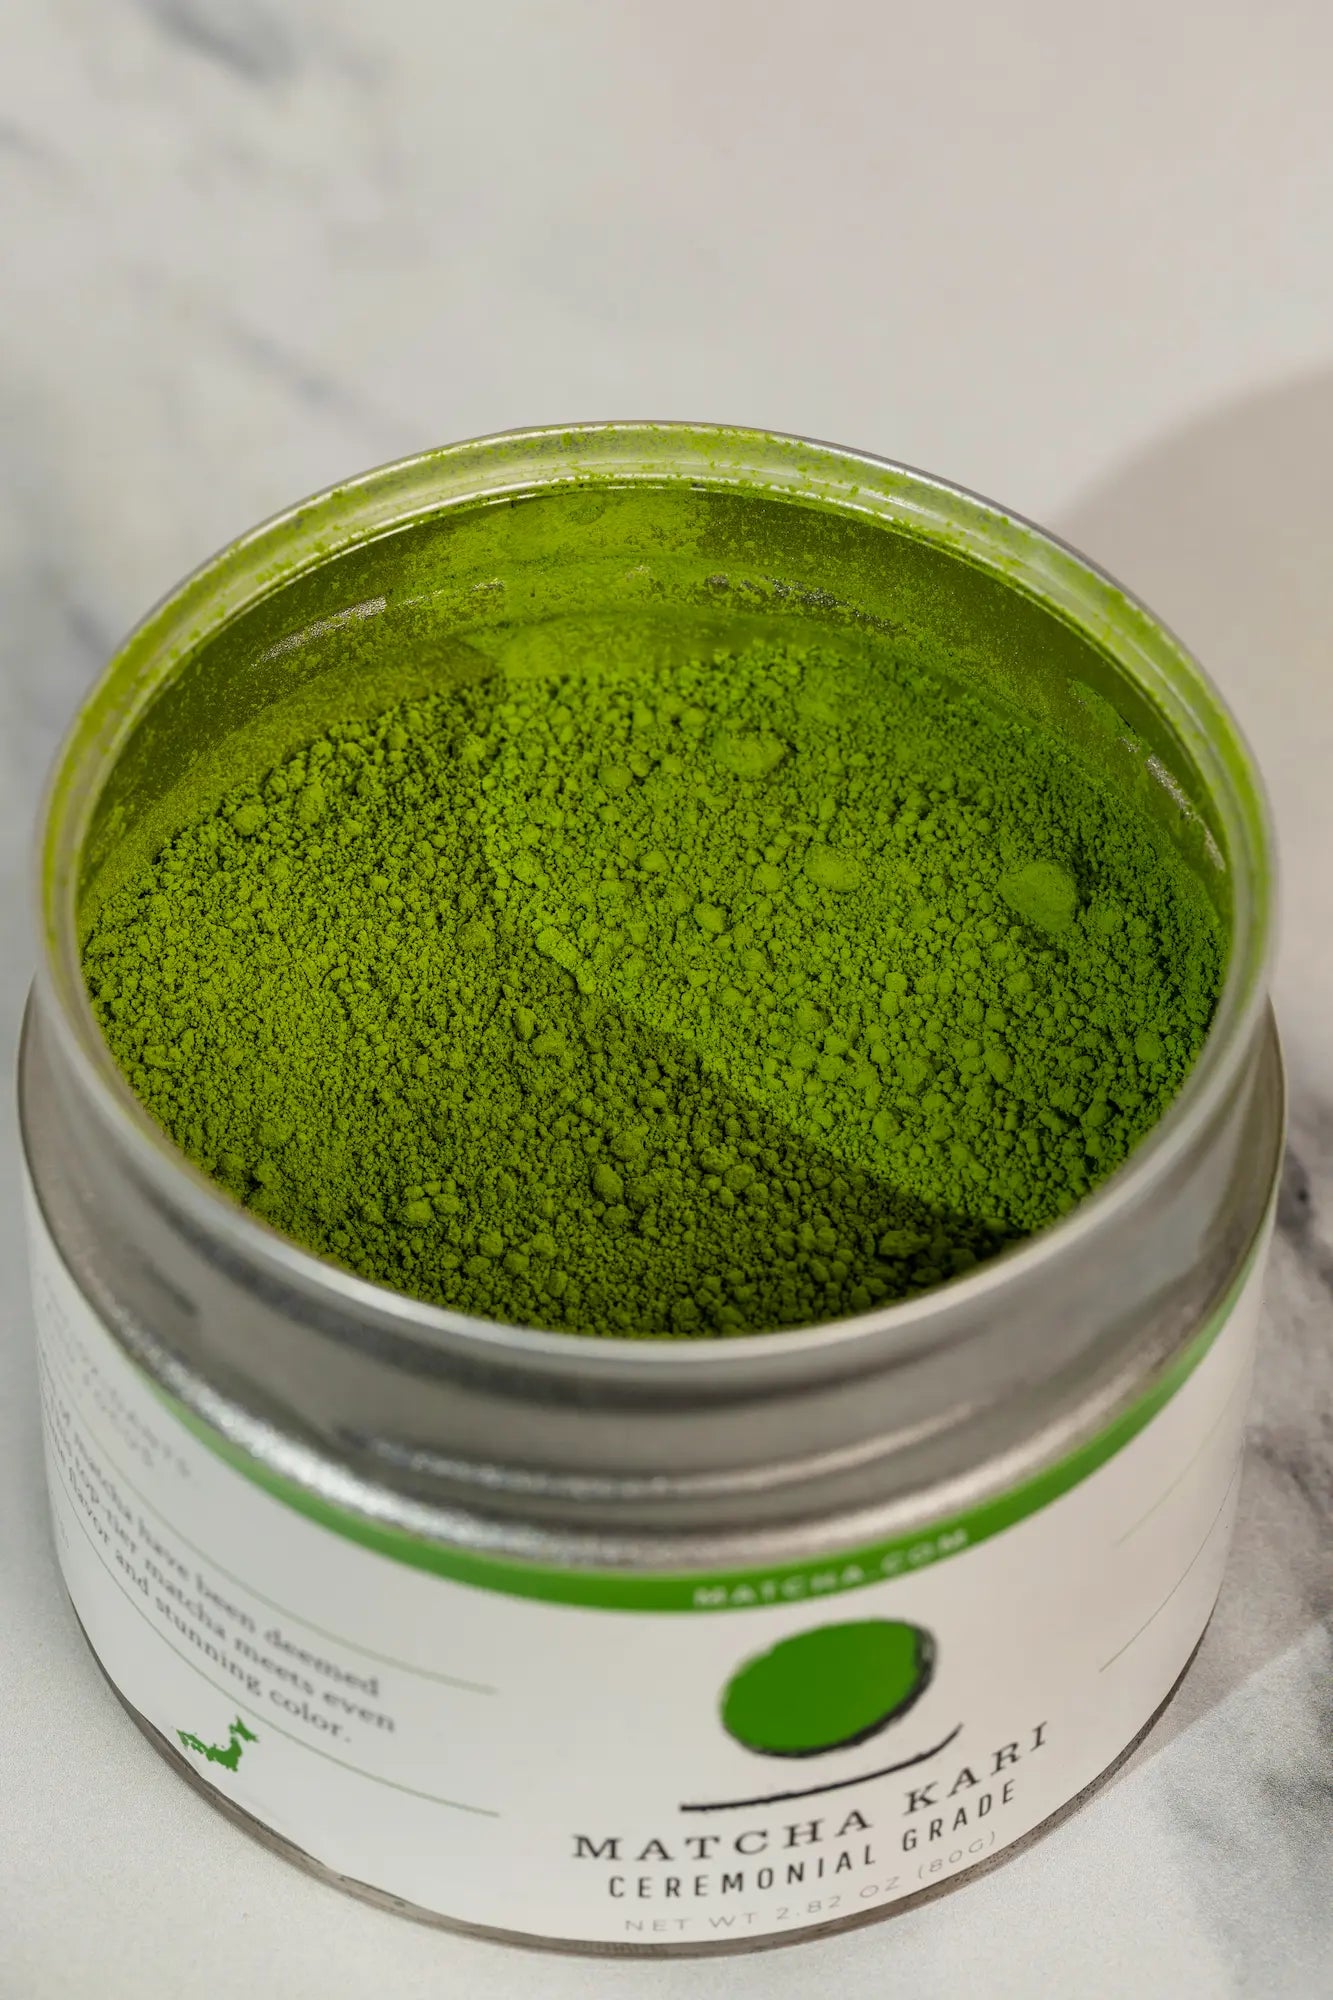 5 Reasons To Drink Matcha, According To Science